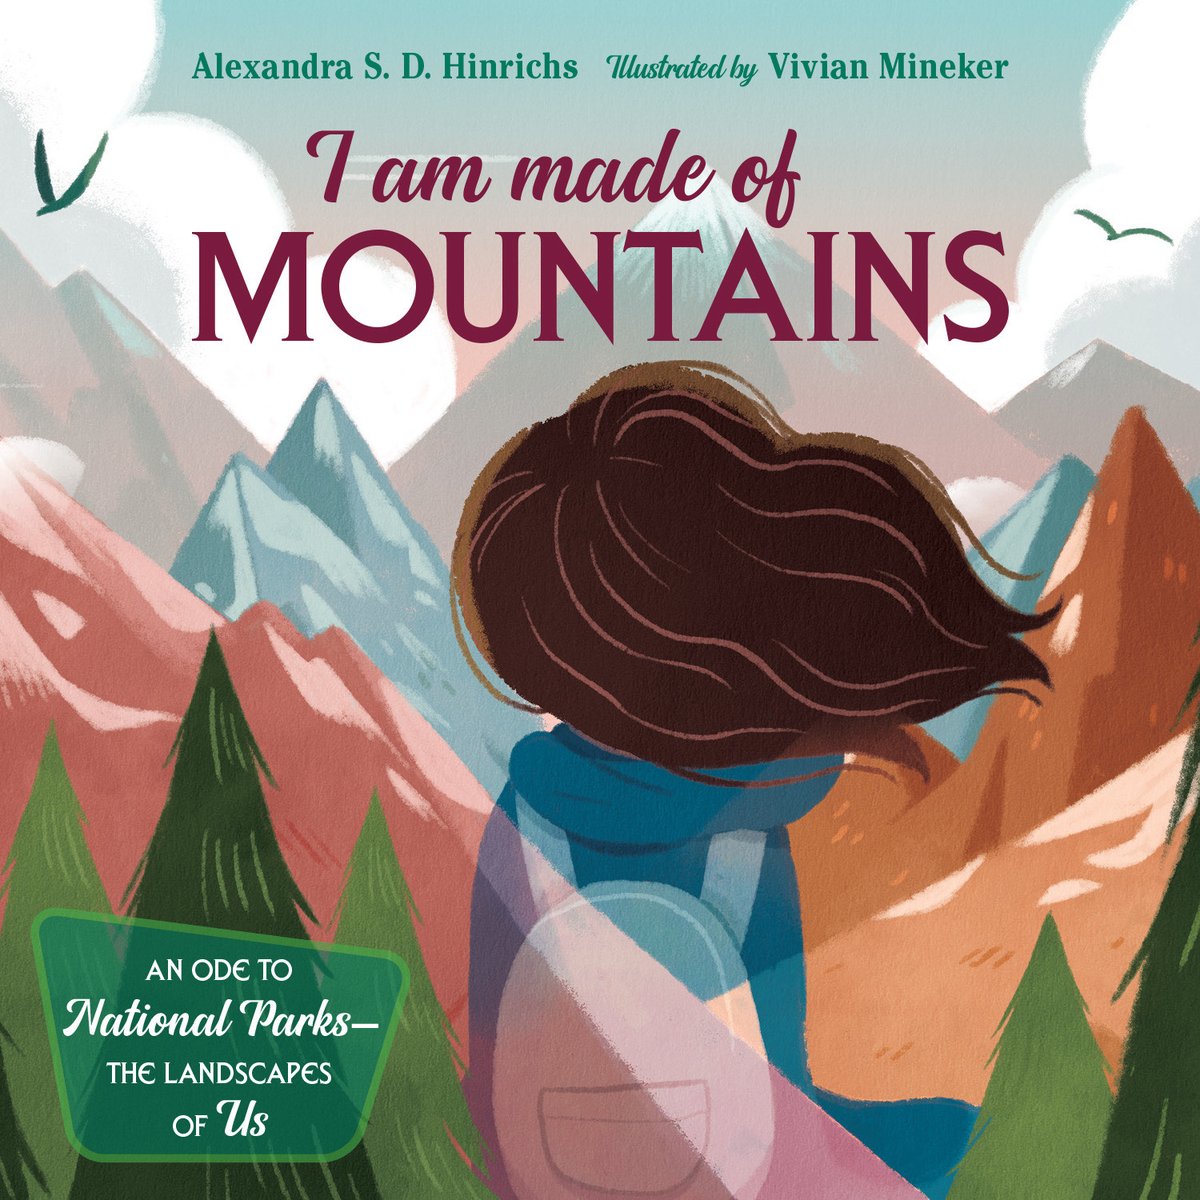 Happy Pub Day for Alexandra Hinrichs's beautiful picture book, I AM MADE OF MOUNTAINS (Charlesbridge), celebrating U.S. national parks. Congratulations, Alexandra!